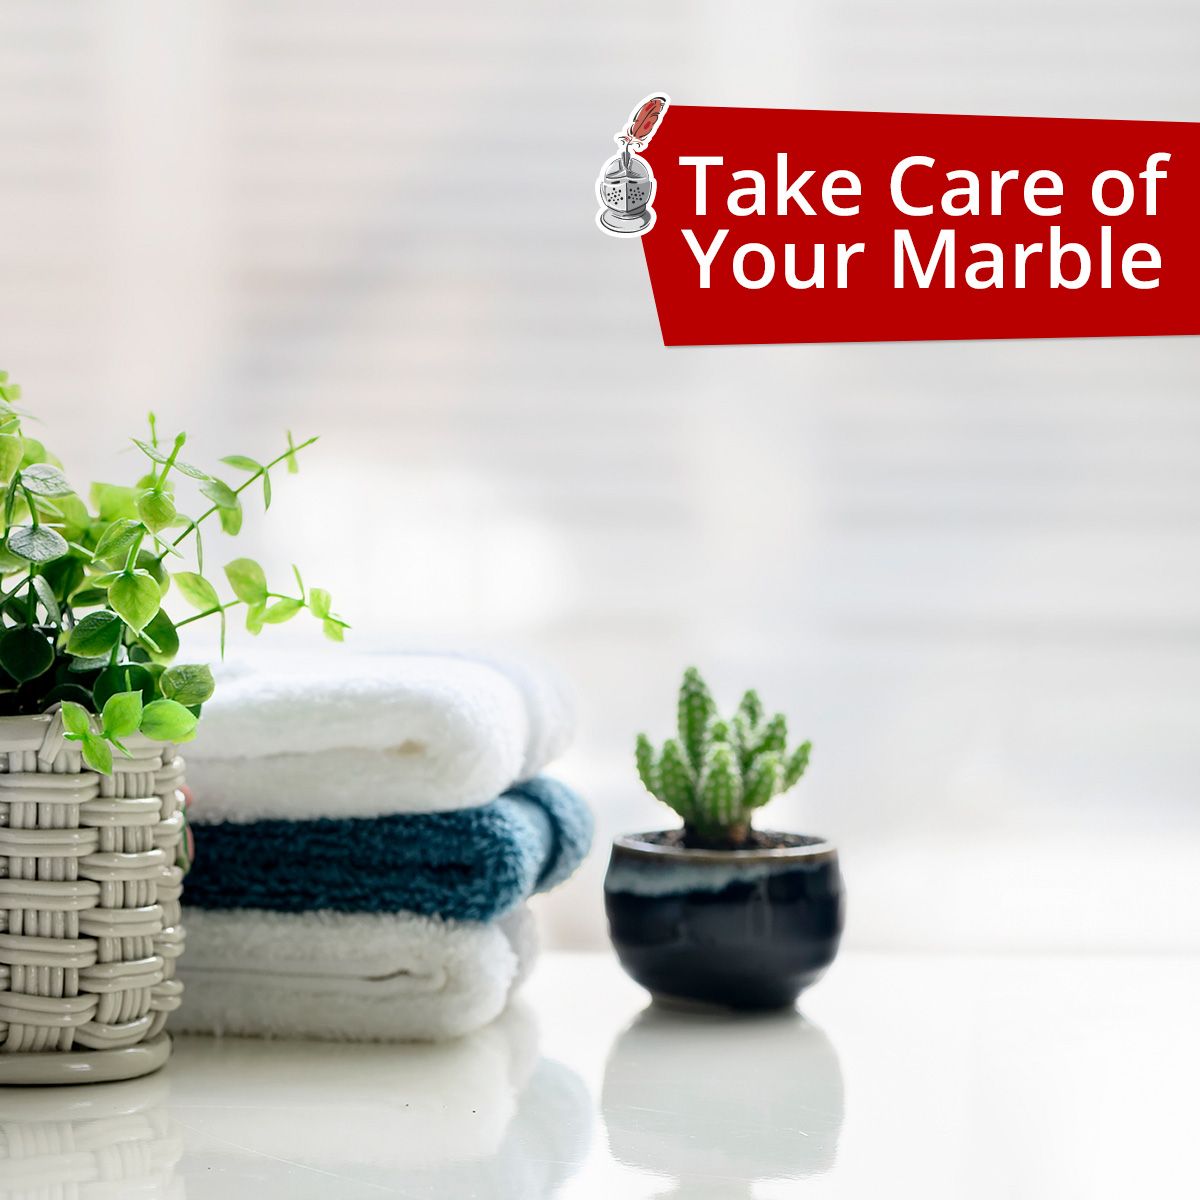 Take Care of Your Marble